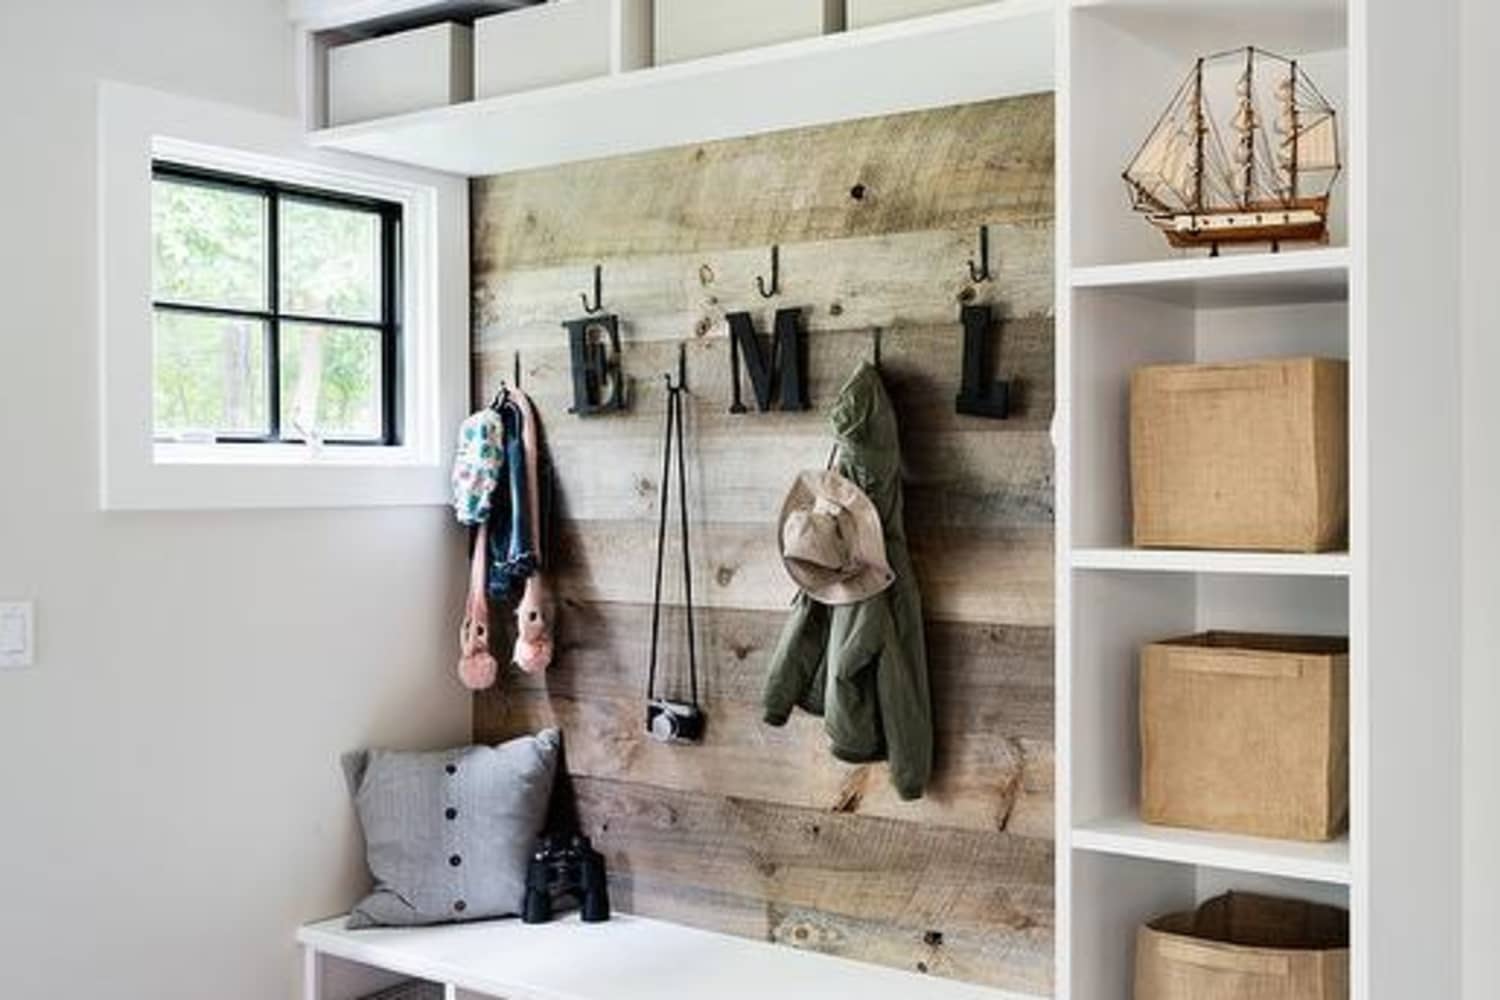 Keeping the Mess Contained: Mud Room Ideas